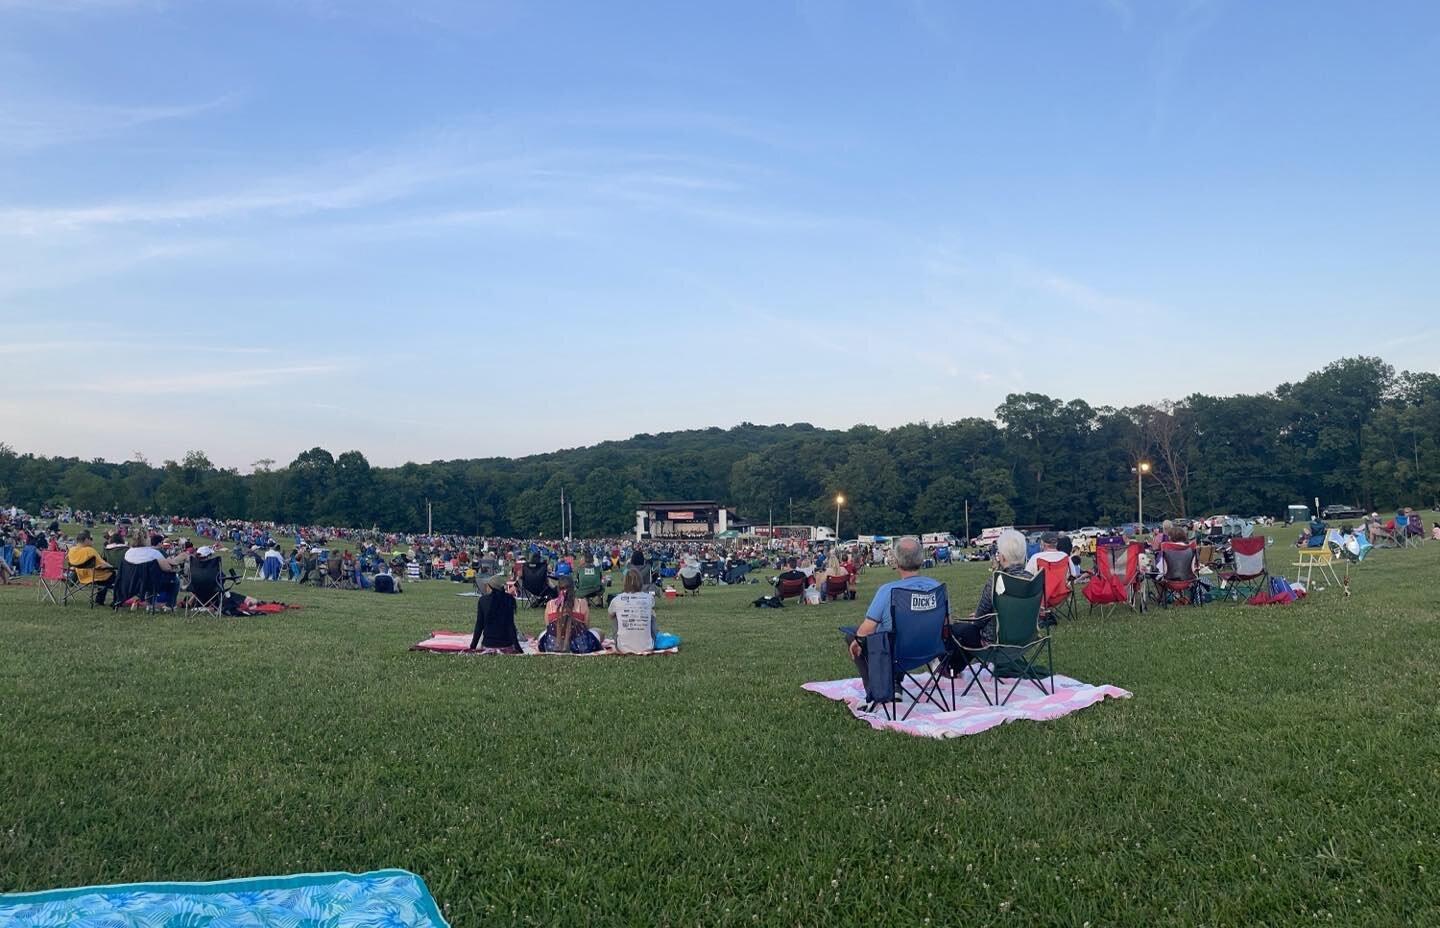 Enjoy Independence Day @ Hartwood Acres with the Pittsburgh Symphony Orchestra!! The one thing I missed through COVID was live music. Feeling grateful